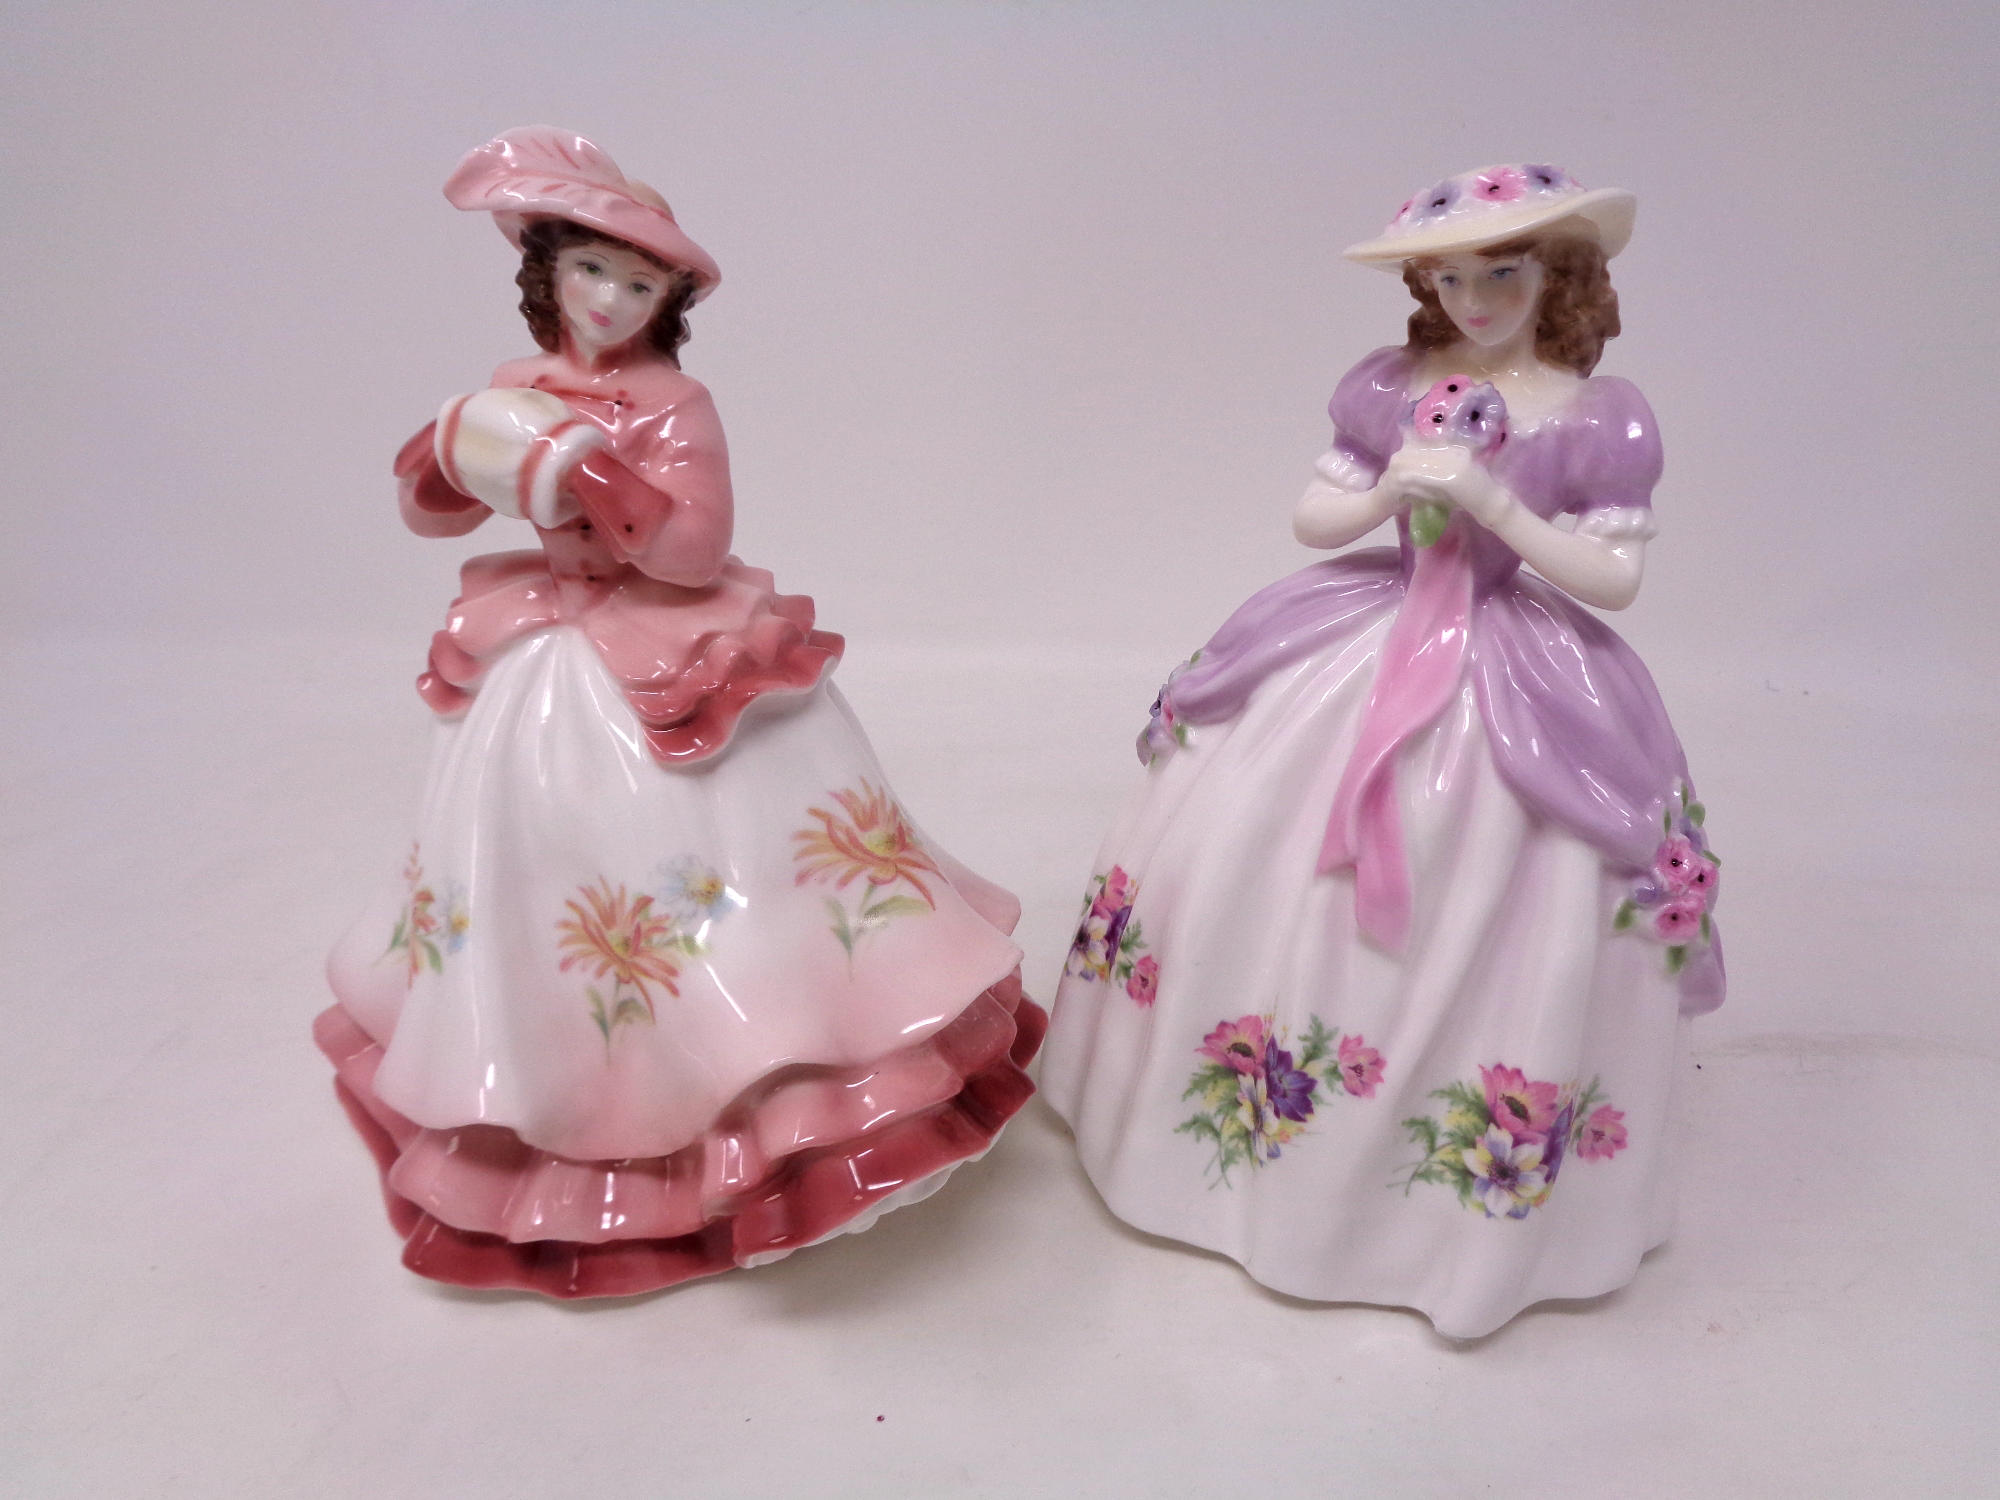 Two Royal Worcester figures, Sweet Anemone No. 1427 of 9500, and Sweet Aster No.1427 of 9500.